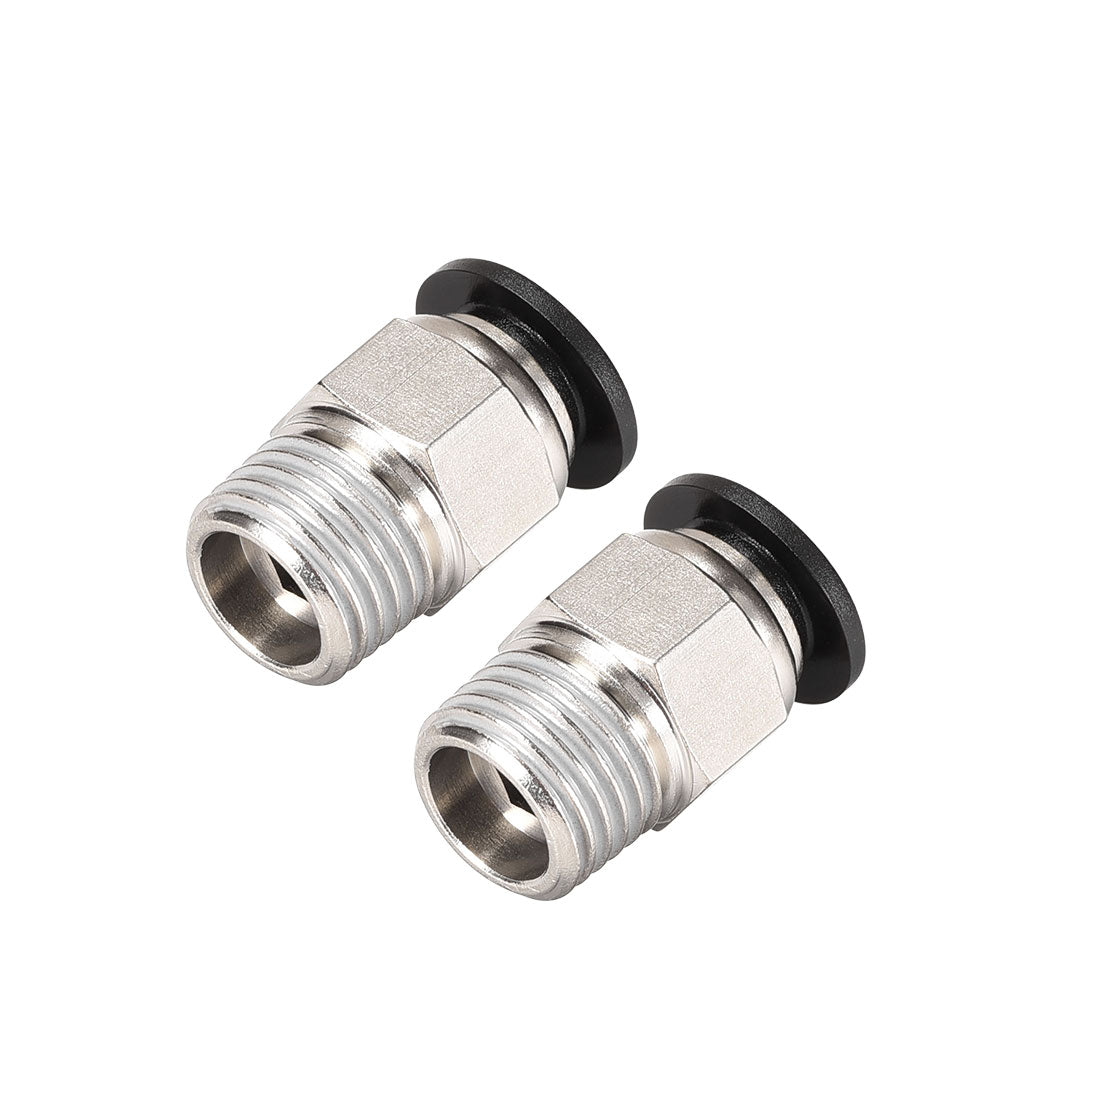 uxcell Uxcell Straight Pneumatic Push to Quick Connect Fittings 1/4NPT Male x 8mm Tube OD Silver Tone 2pcs